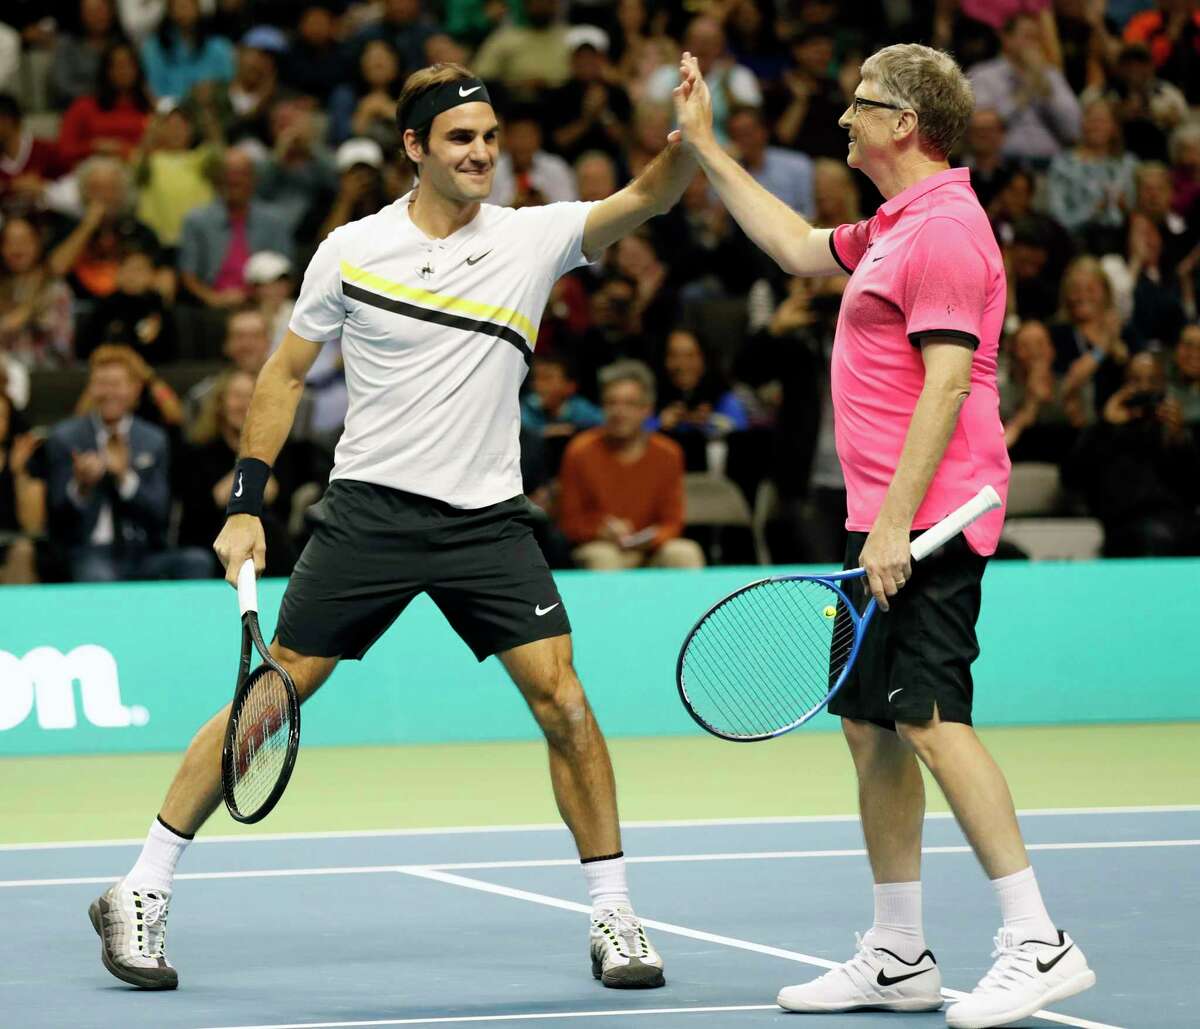 Roger Federer and Bill Gates high five while defeating Jack Sock and Savannah Guthrie during the pro/celebrity doubles tennis match during The Match for Africa at the SAP Center in San Jose, Calif., on Monday, March 5, 2018.